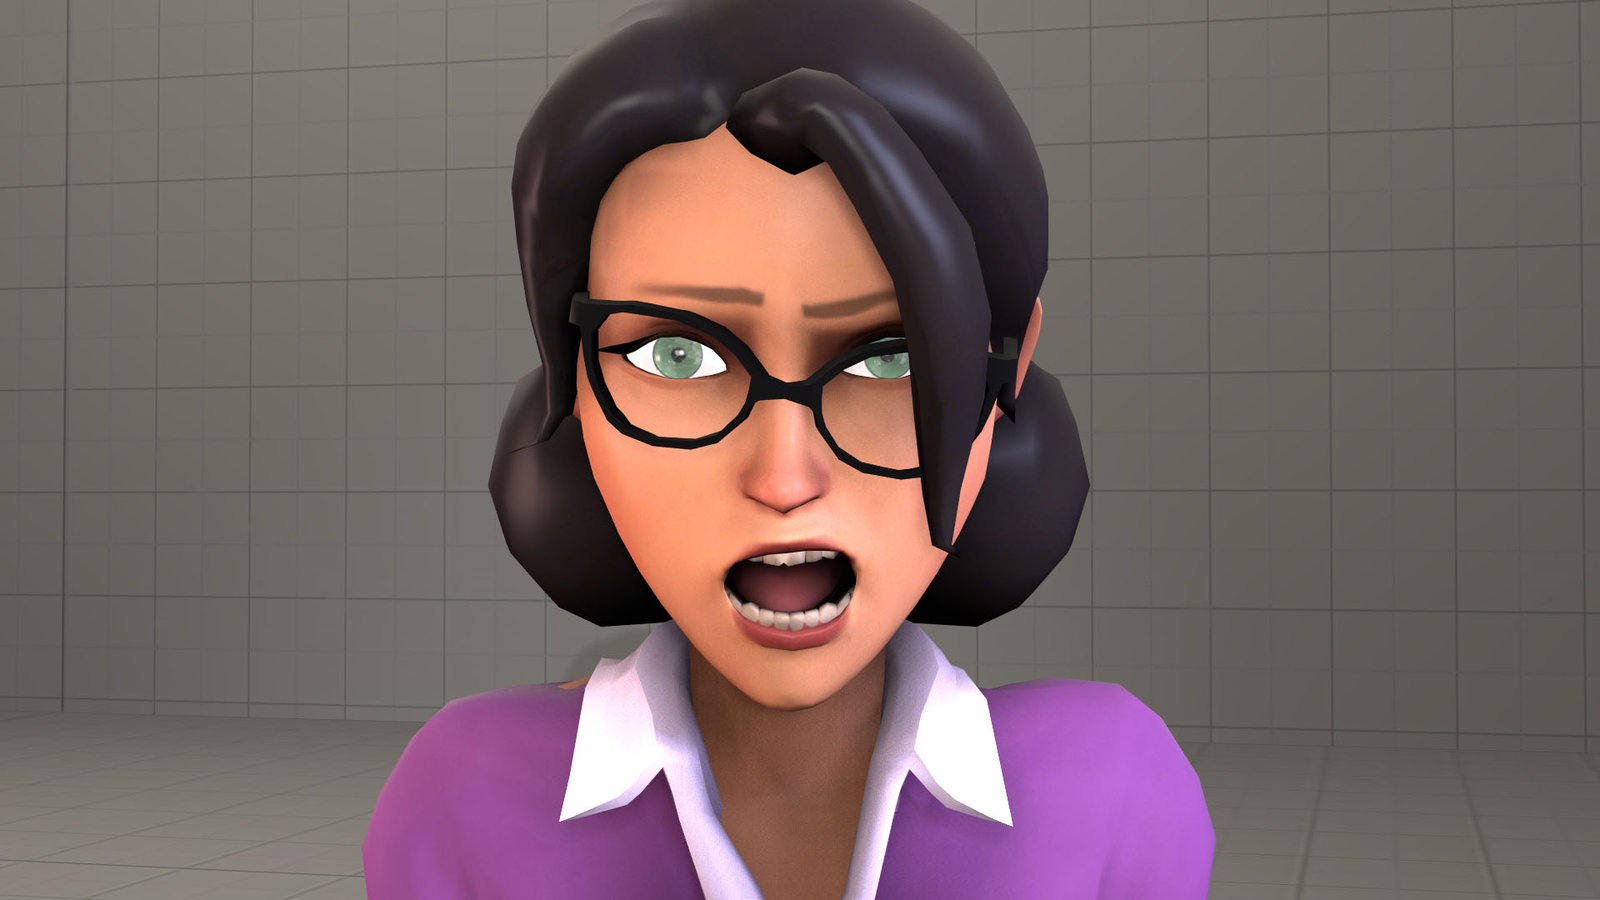 Poling face. Мисс Полинг тф2. Tf2 Scout and Miss Pauling. Team Fortress 2 Мисс Полинг 34. Мисс Паулинг SFM.